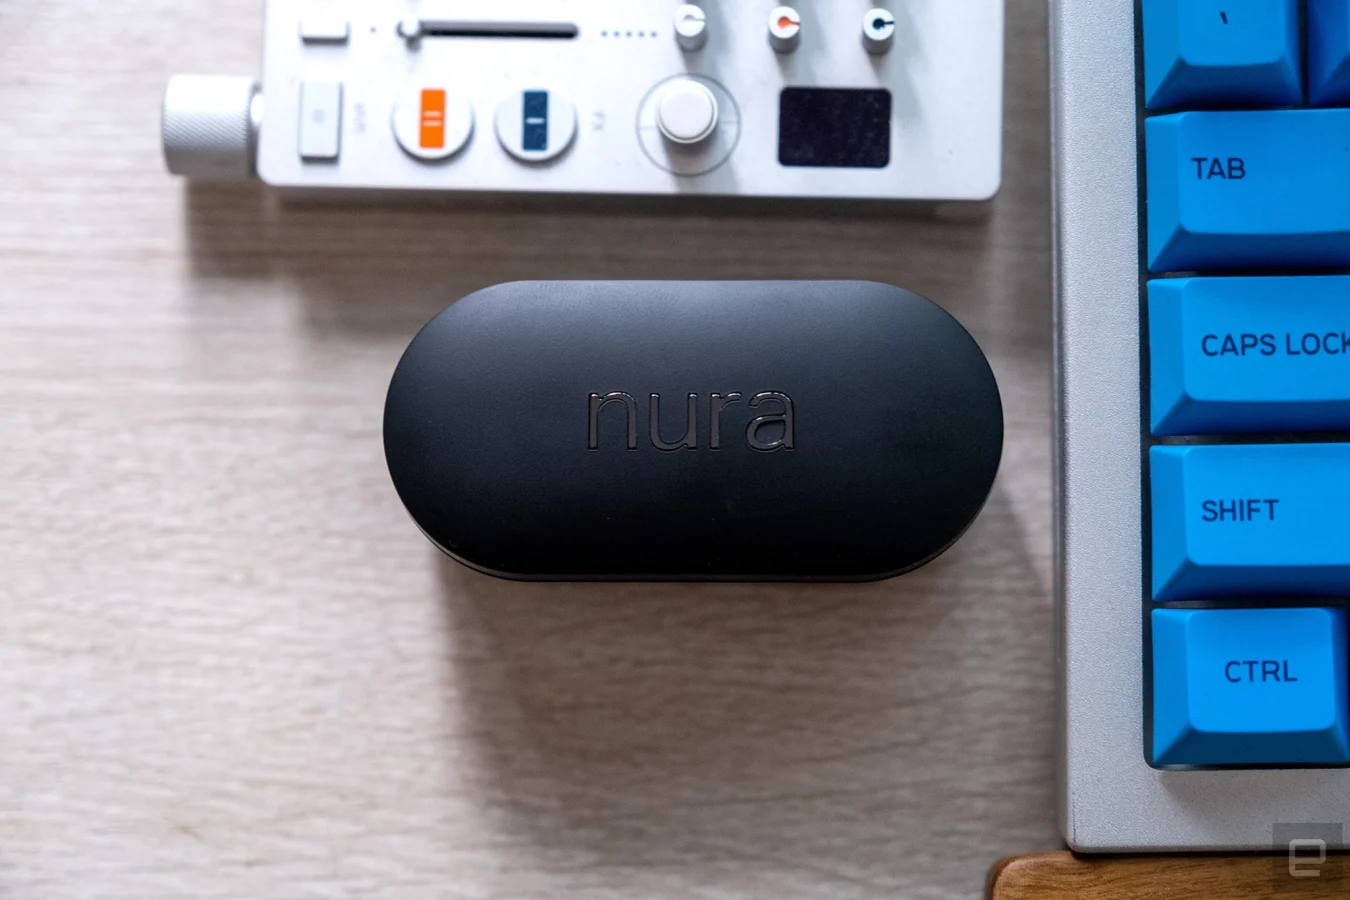 The NuraTrue wireless headphones pictured in their closed charging case.